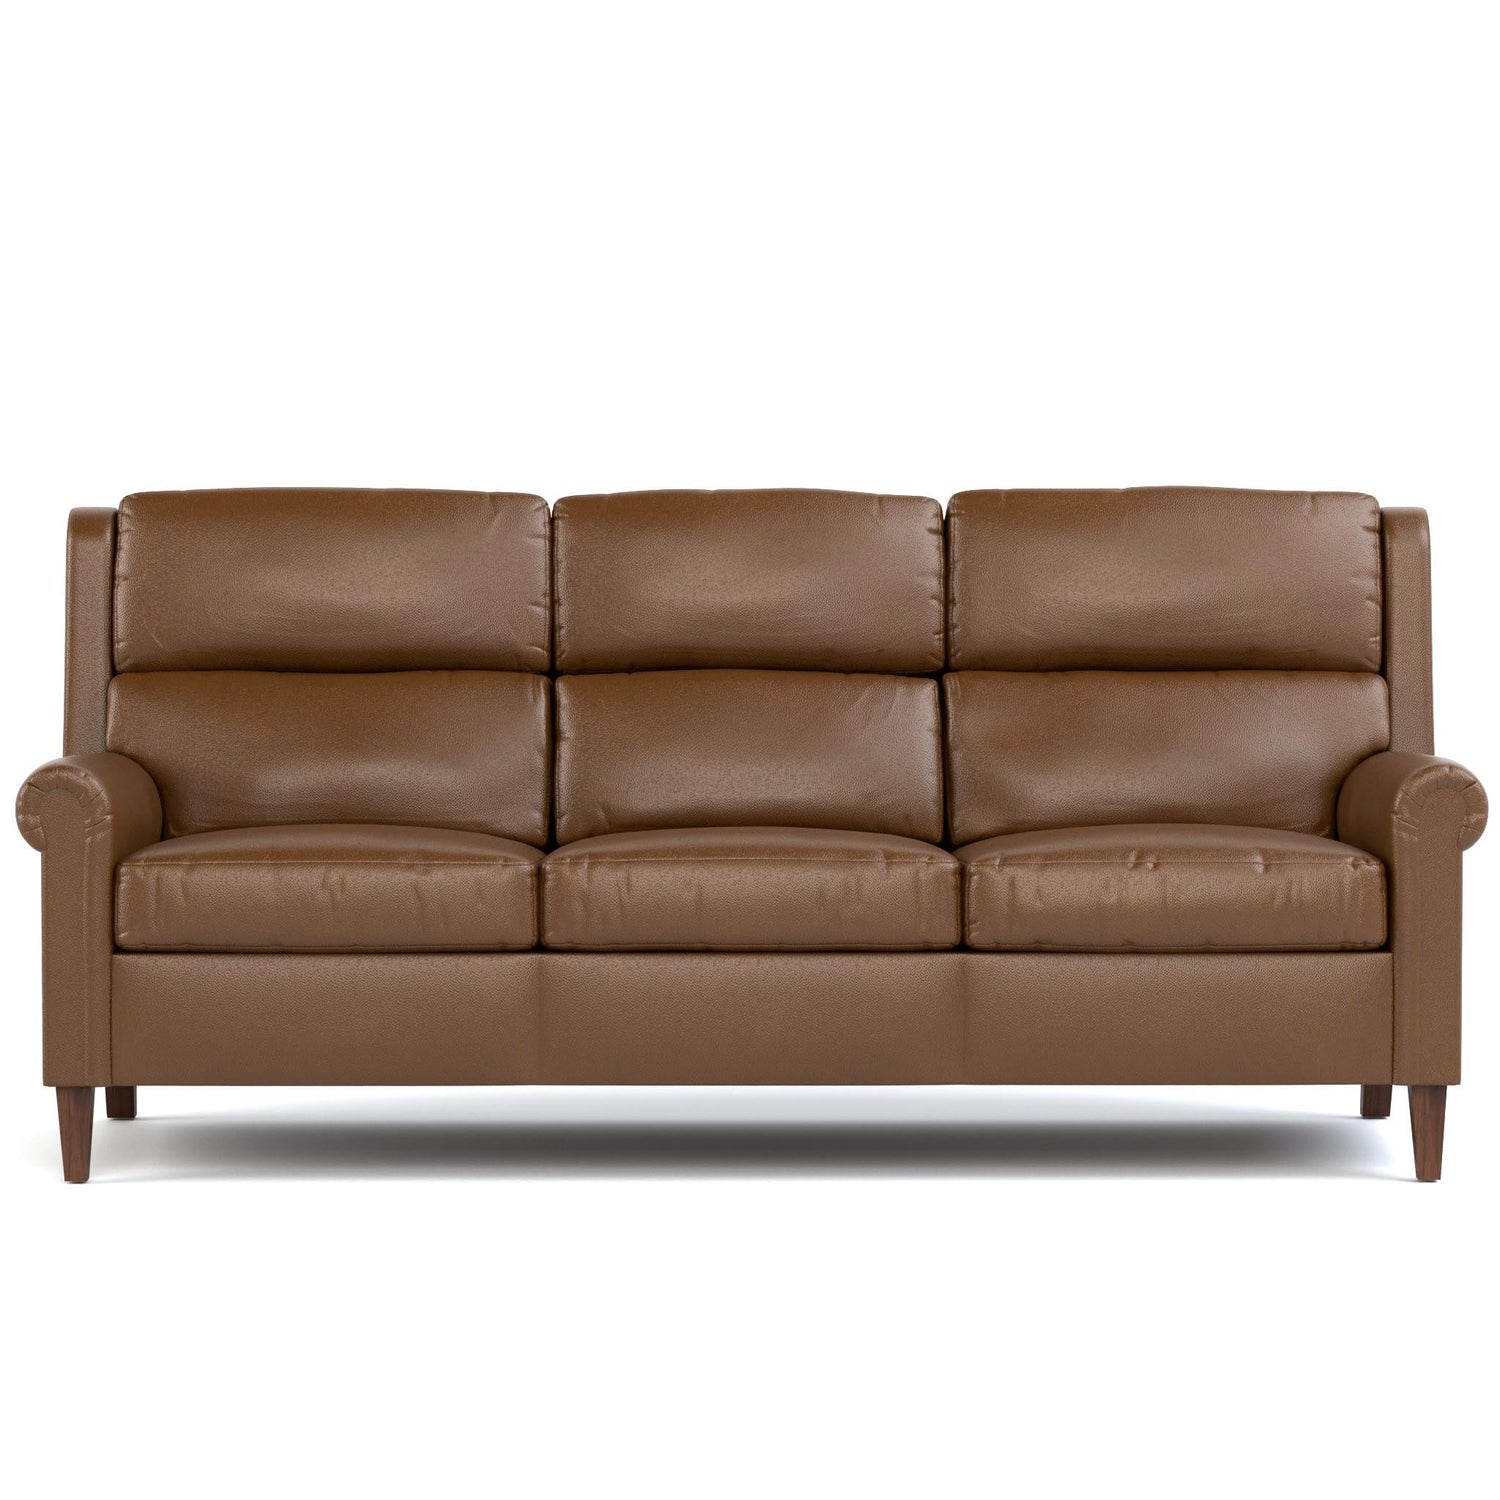 Woodlands Small Roll Arm Sofa Selvano Bark - Front